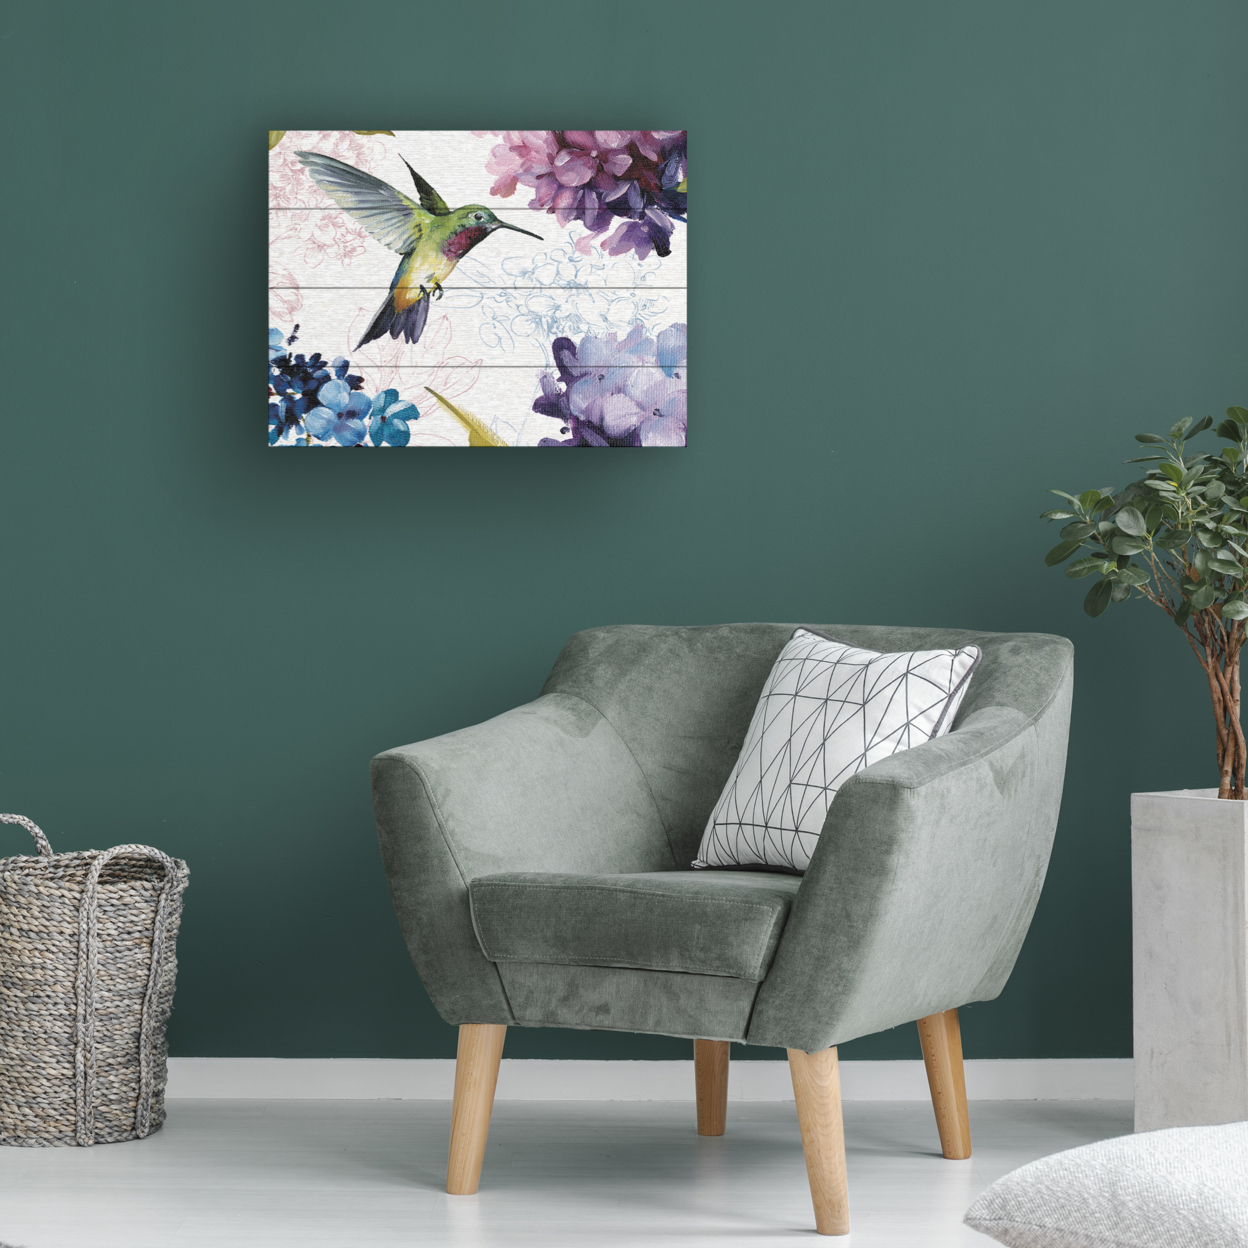 Wall Art 12 X 16 Inches Titled Spring Nectar Square II Ready To Hang Printed On Wooden Planks